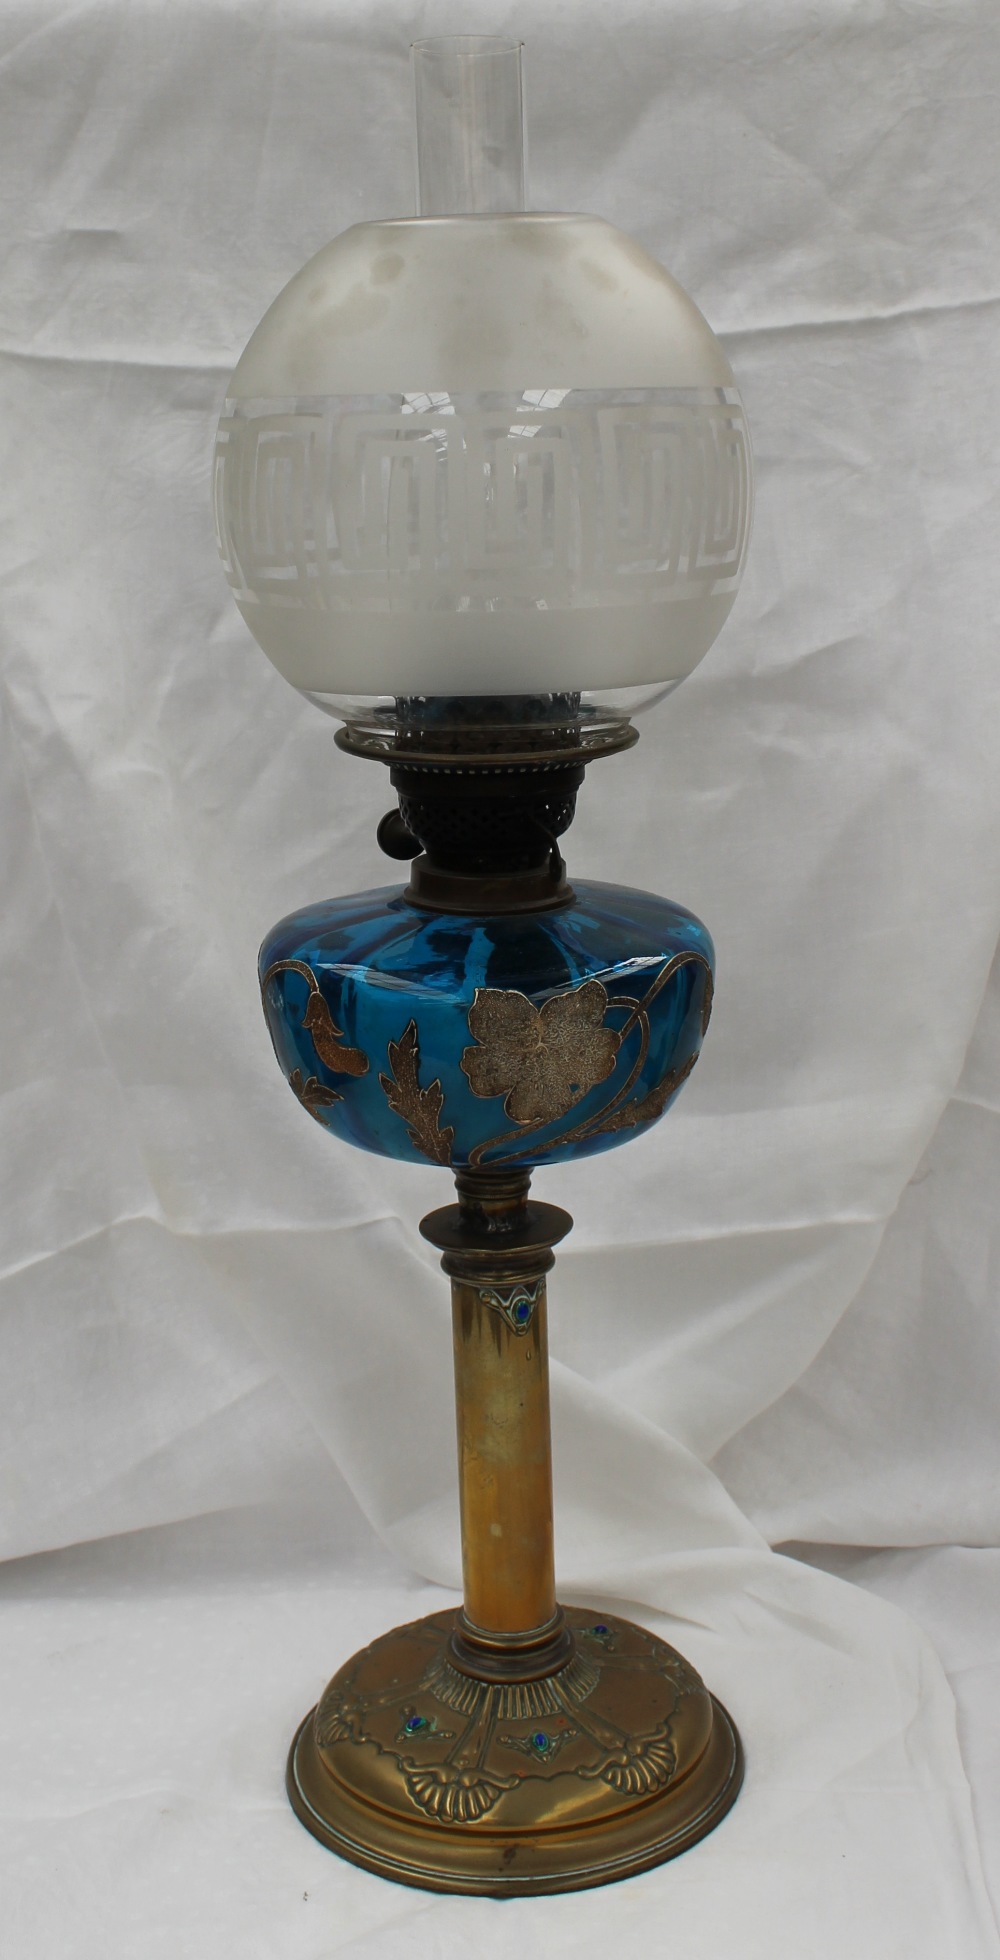 A Victorian oil lamp with an etched glass globe shade above a blue glass reservoir decorated with